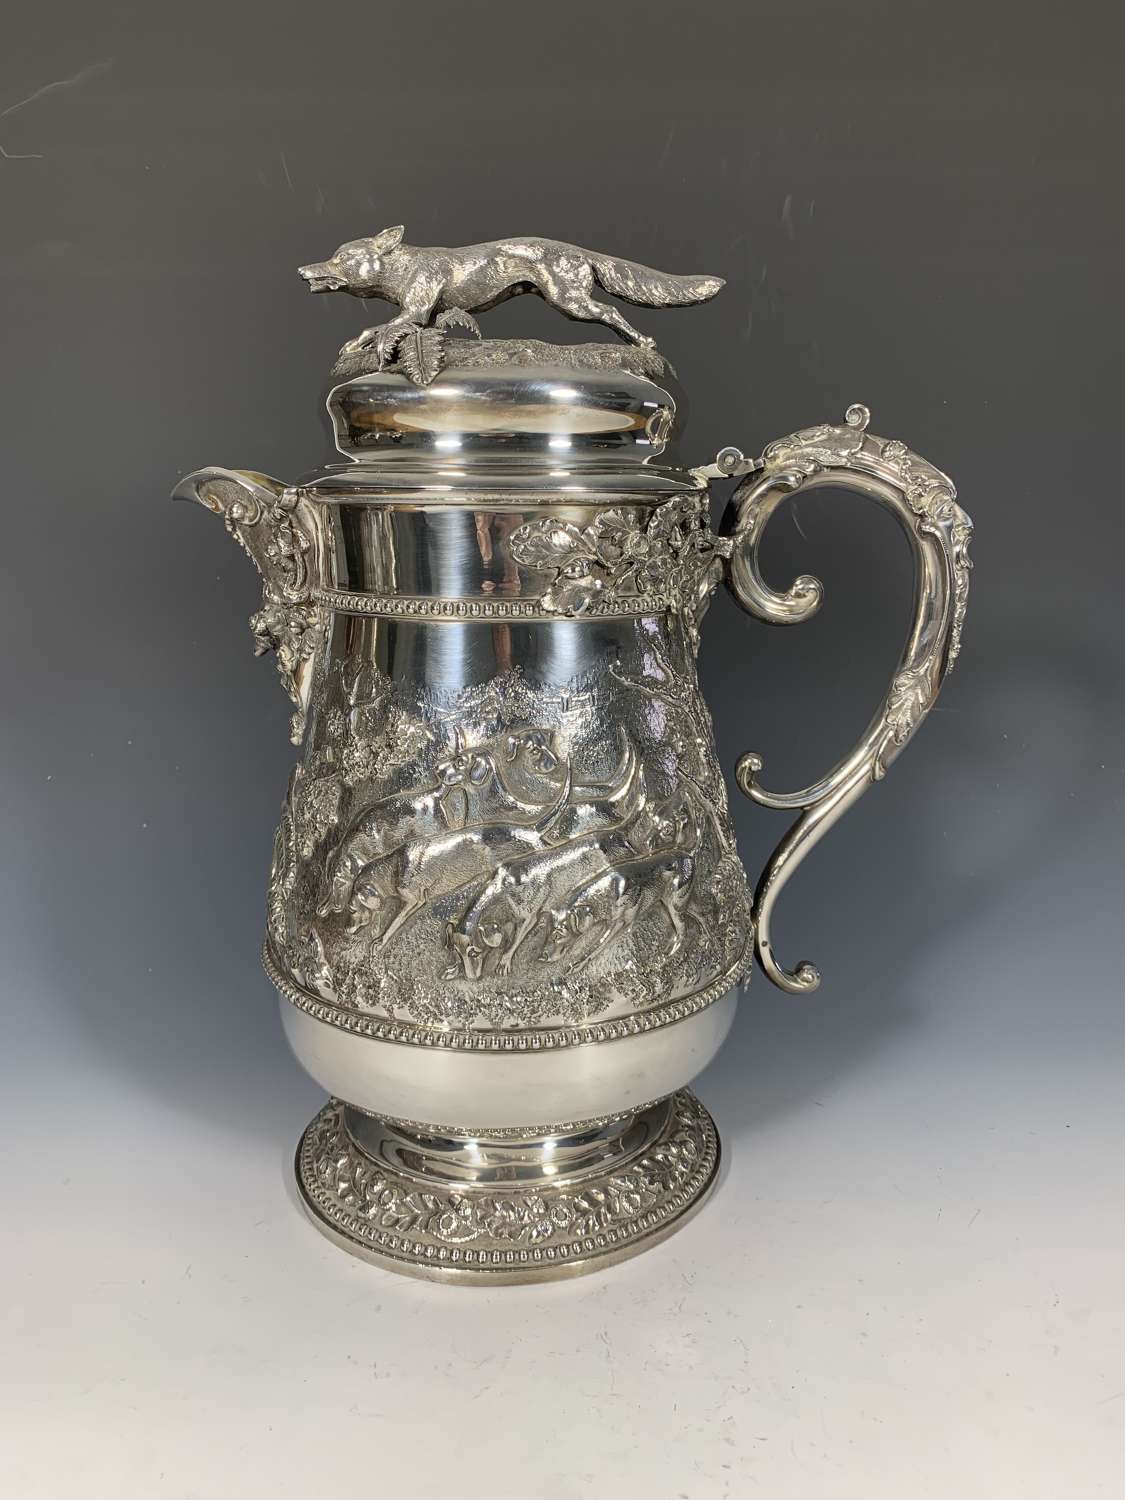 An exceptionally large hunting themed sterling silver tankard